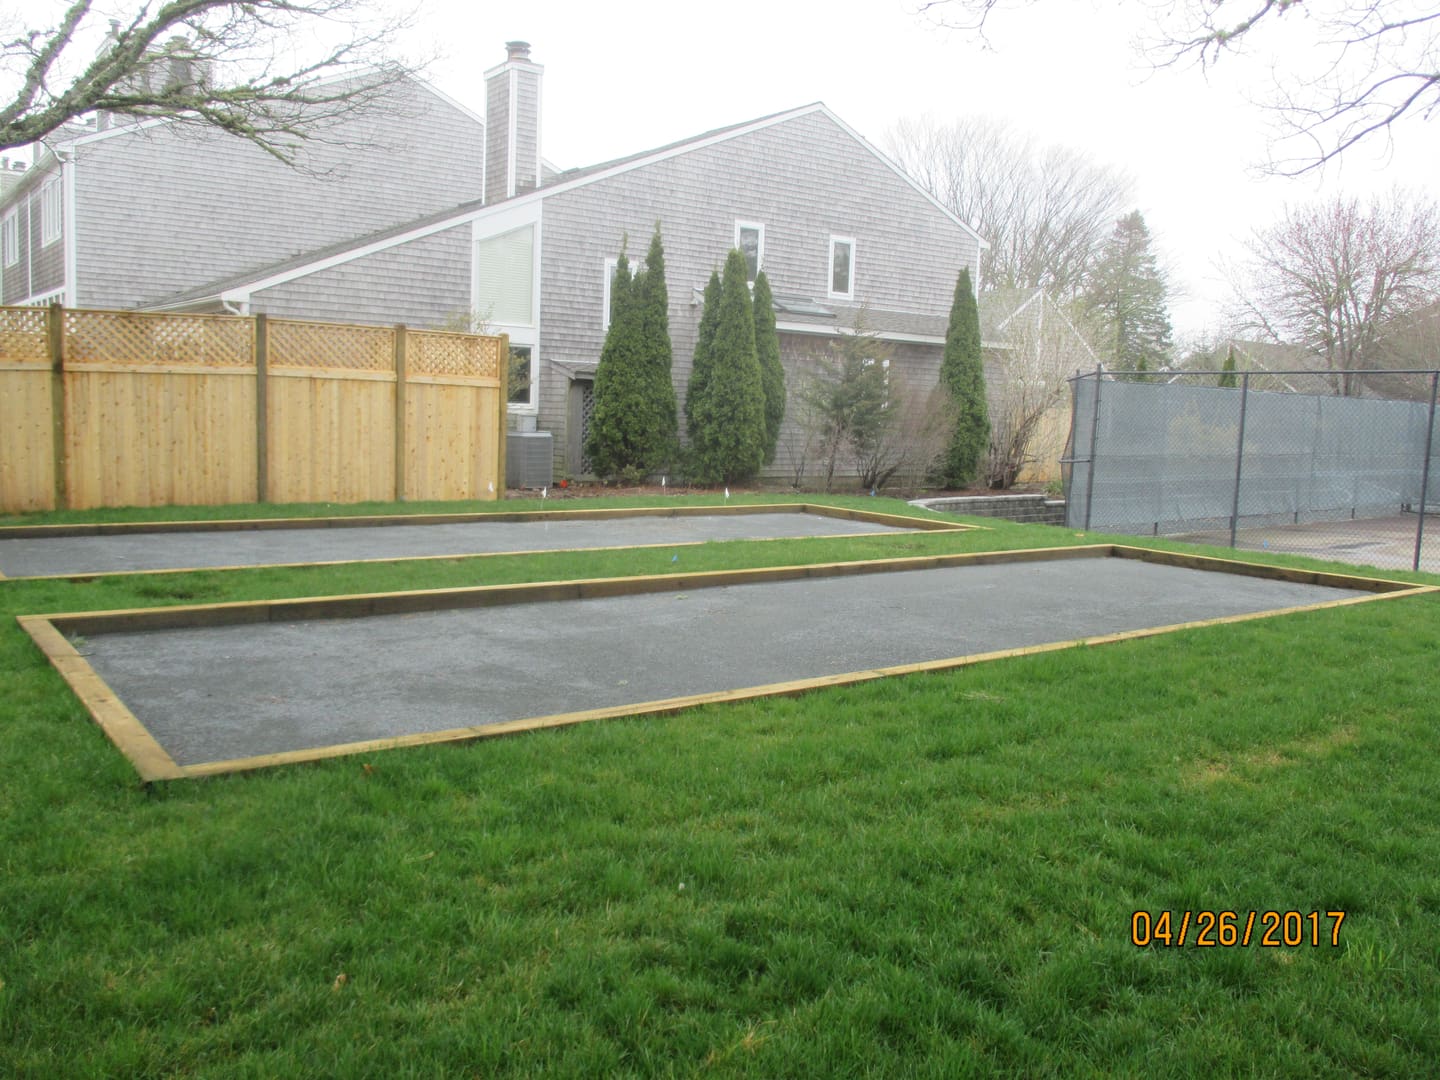 A backyard with grass and trees in the background.